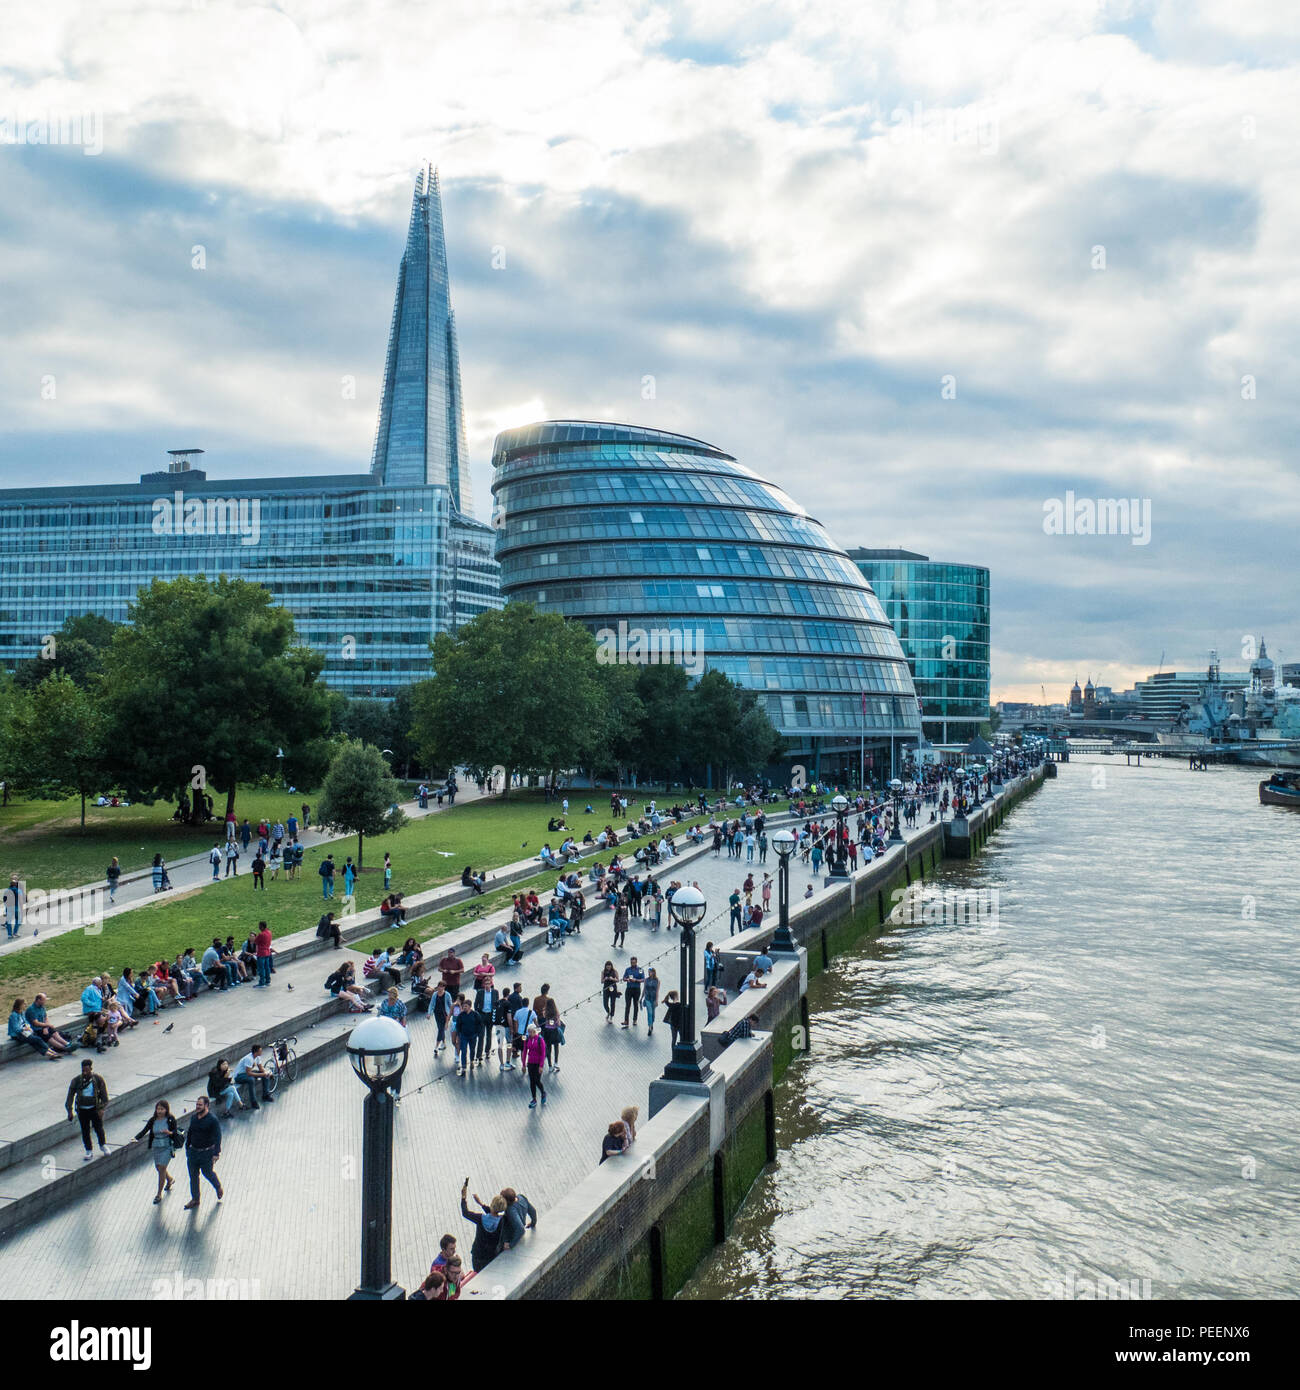 Modern architecture including The Shard (of Glass) Skycraper in the Southwark area on the South bank of the River Thames, London Stock Photo